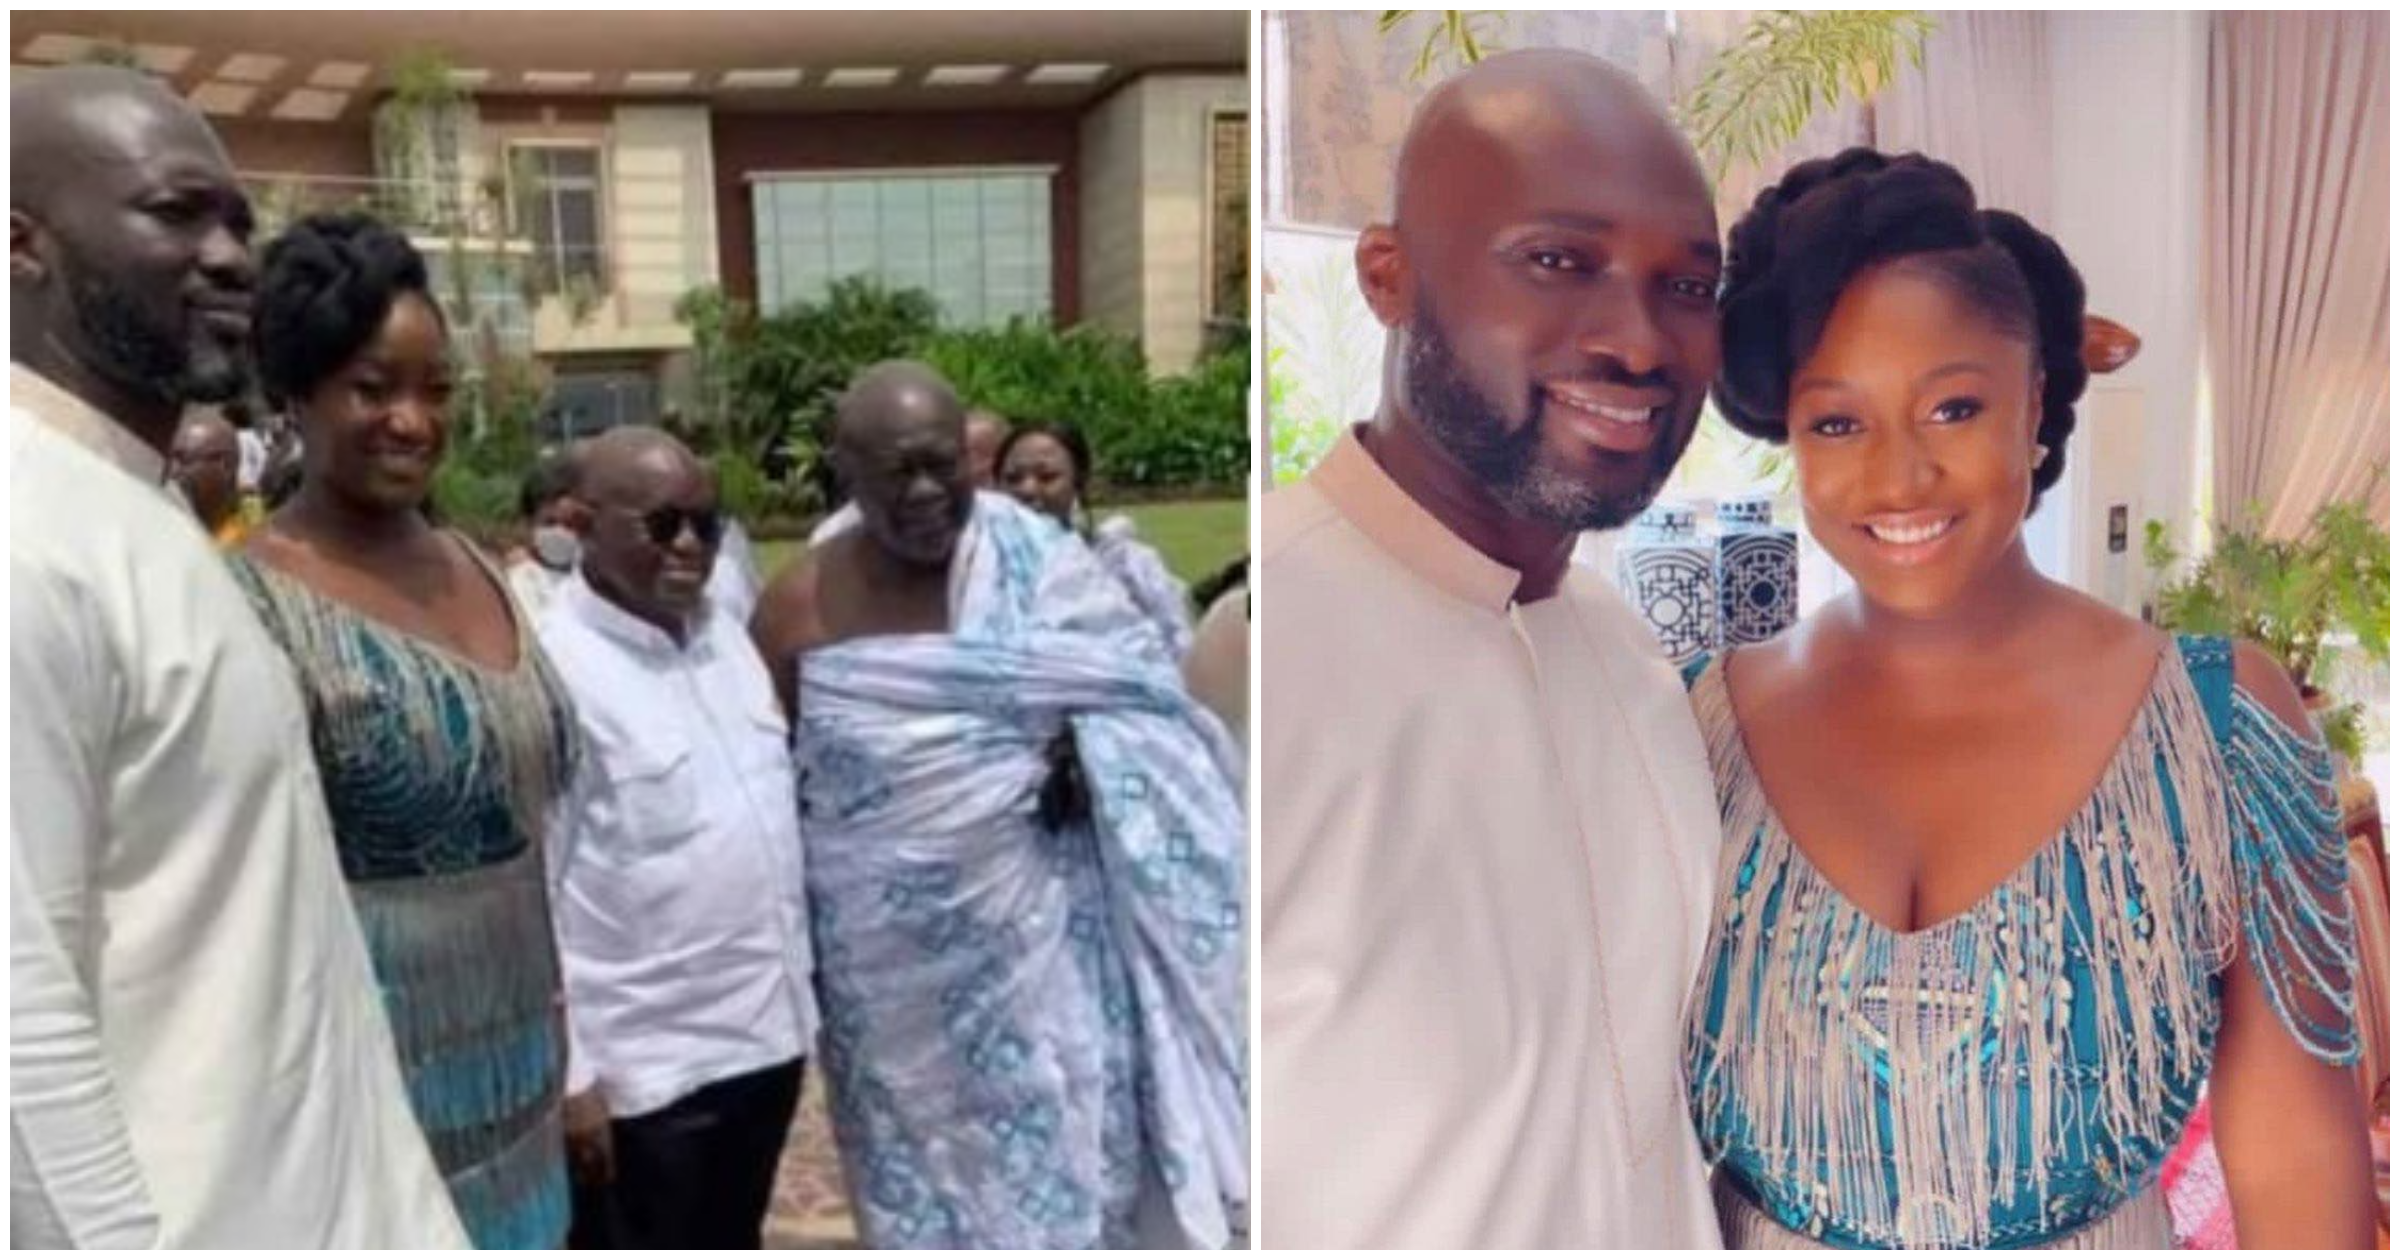 Akufo-Addo's daughter and Kofi Jumah's son to tie the knot on Saturday, exclusive details of the private wedding pop up in video